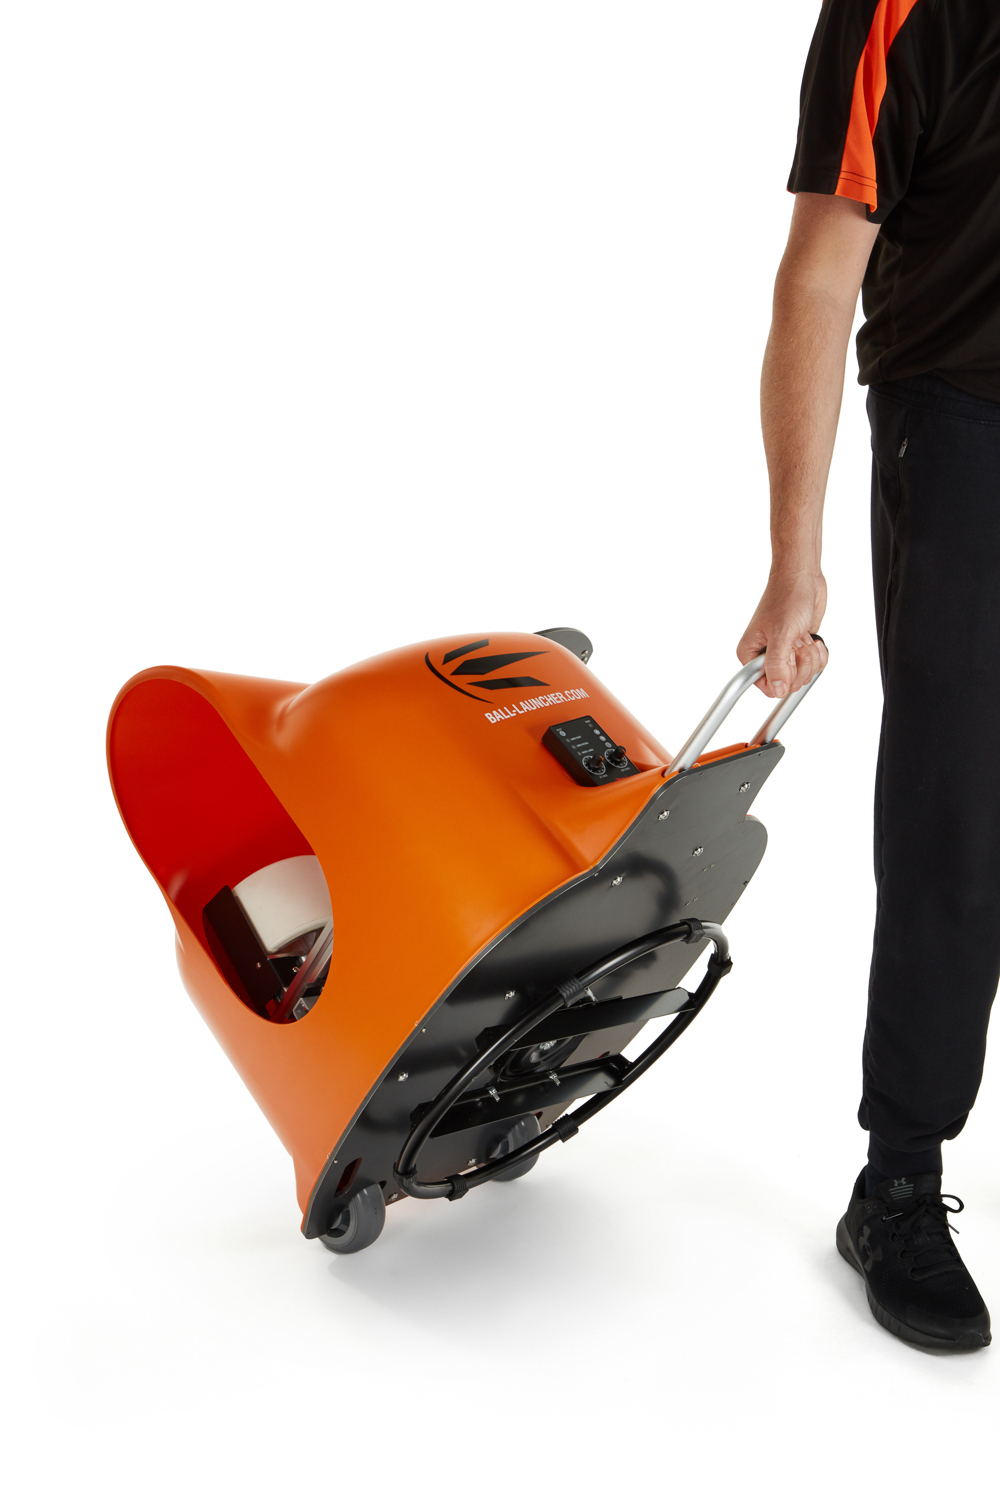 Ball Launcher Trainer – Soccer Delivery Machine [Auto Feeder Upgrade: Yes]